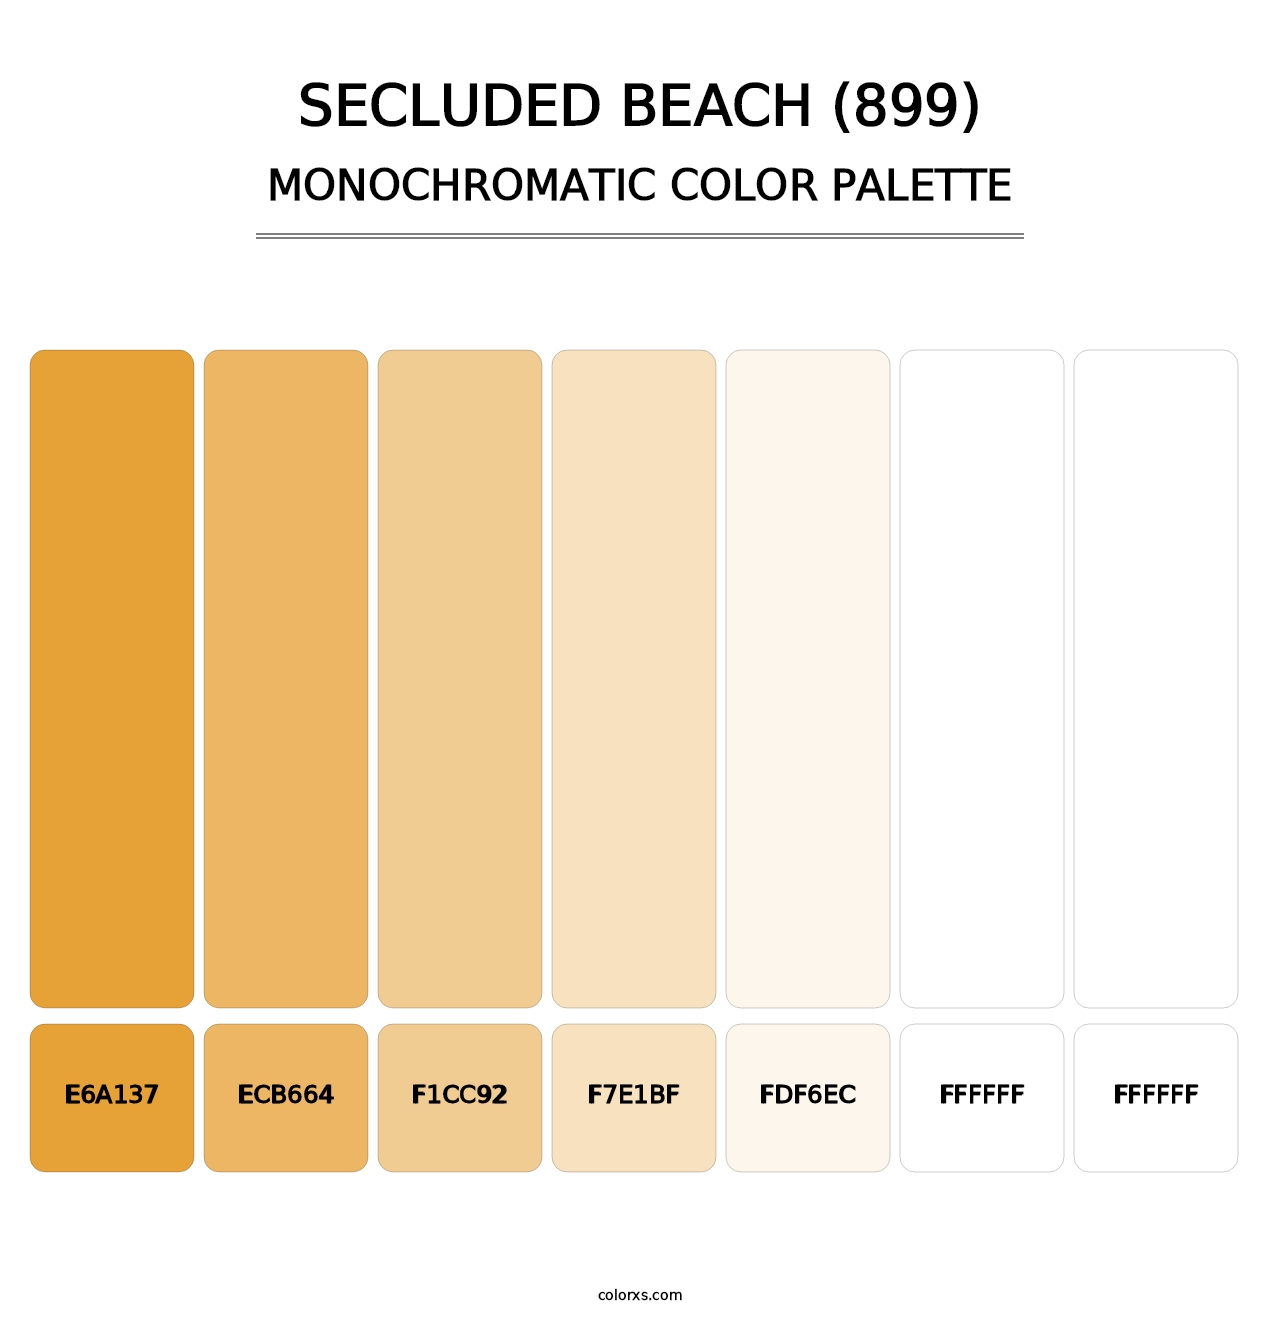 Secluded Beach (899) - Monochromatic Color Palette